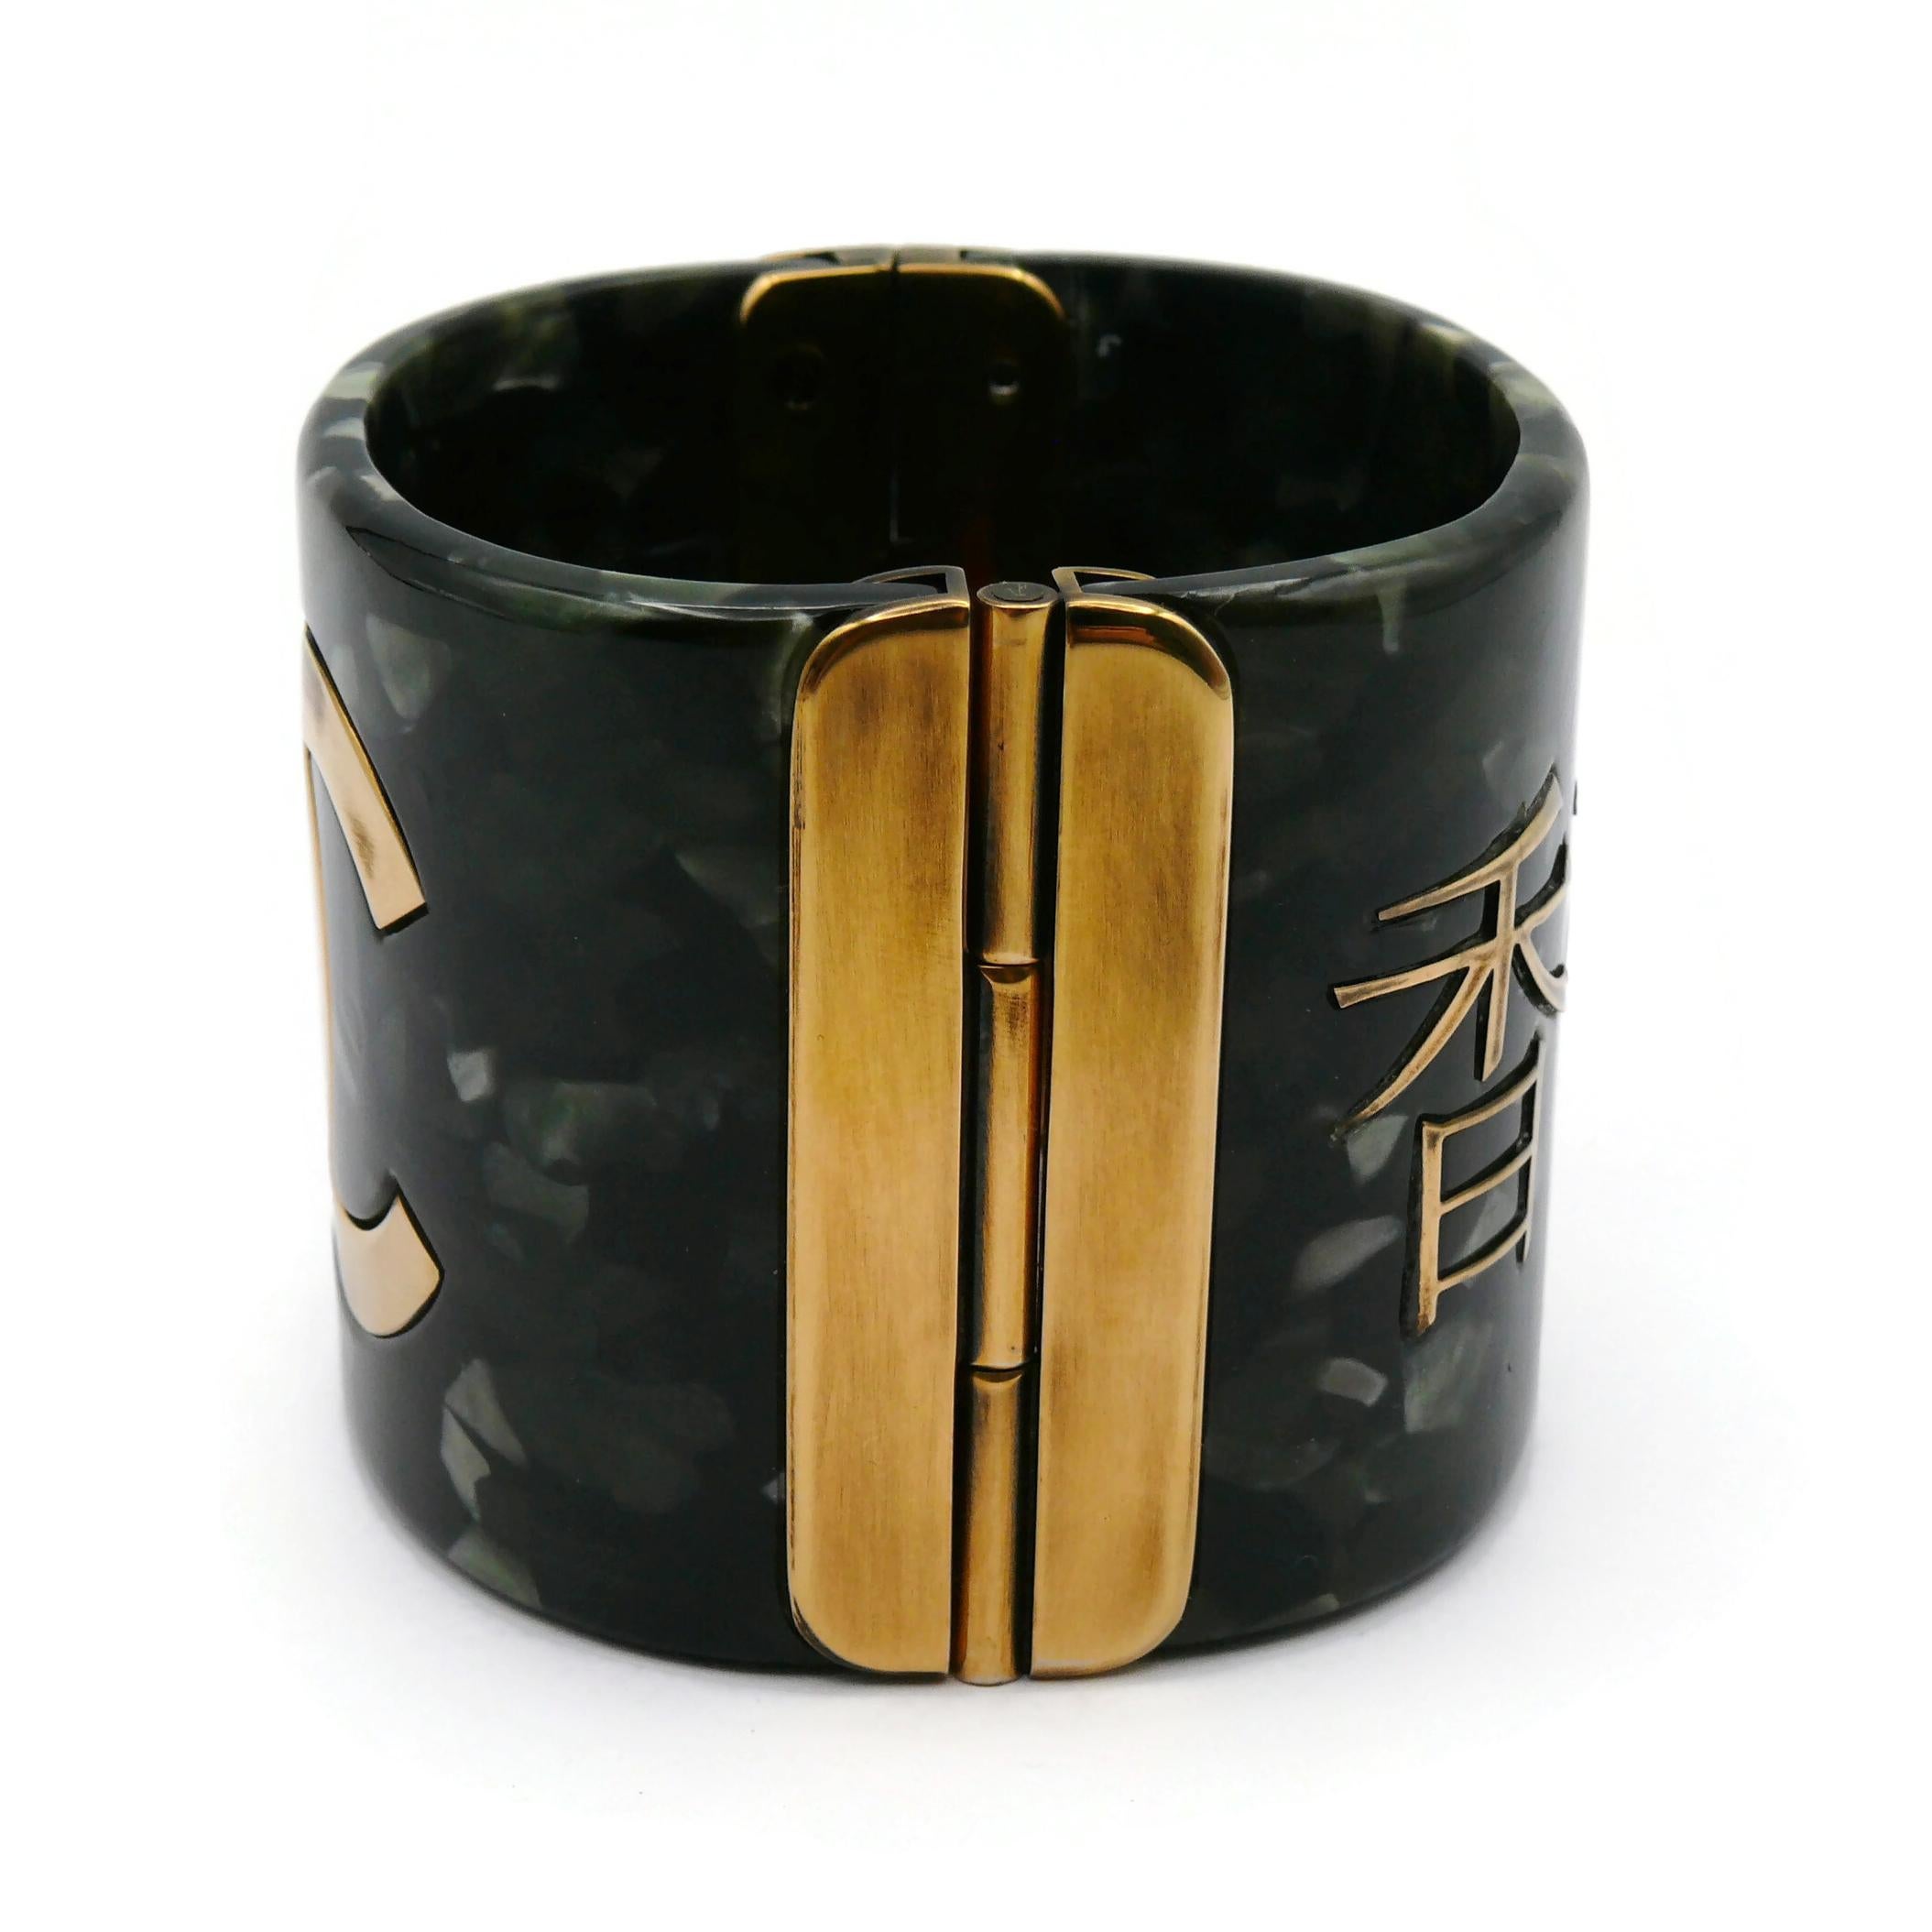 CHANEL Paris-Shanghai Metiers D'Art Collection Cuff Bracelet, Pre-Fall 2010 In Good Condition For Sale In Nice, FR